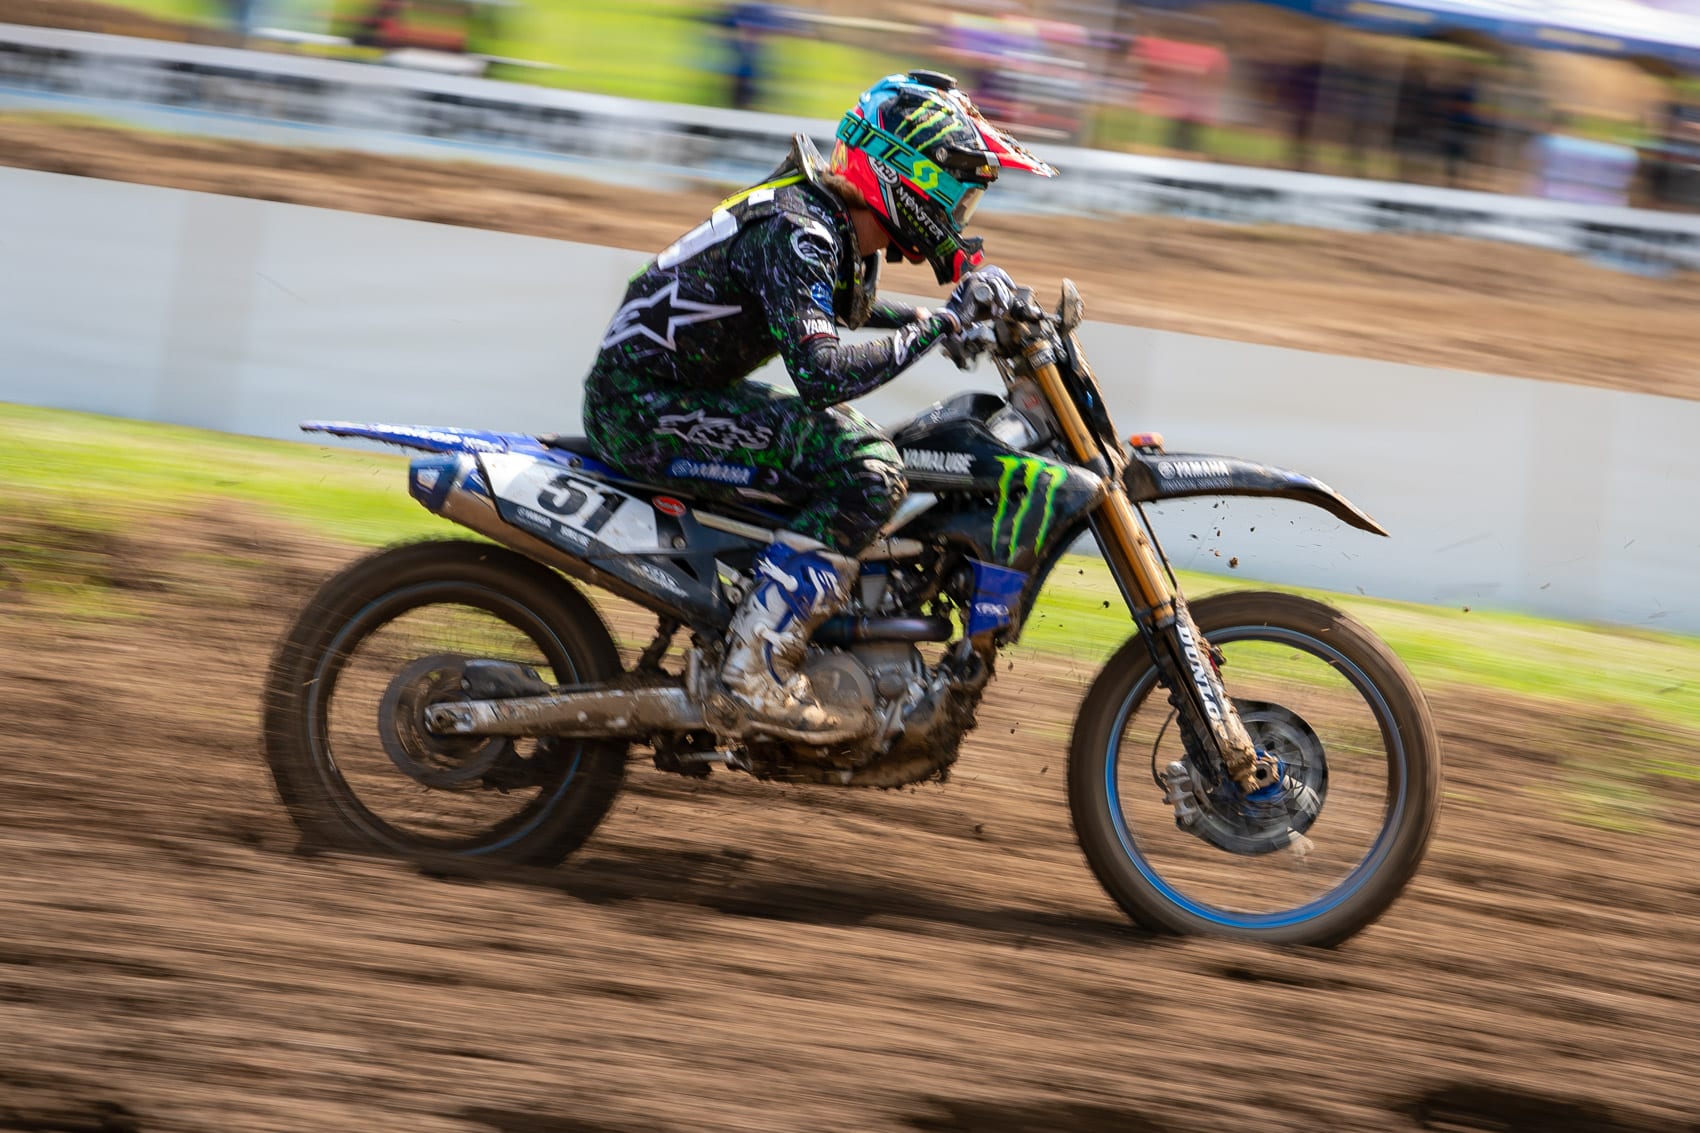 Race Preview Of The 2019 Ironman Motocross | Swapmoto Live